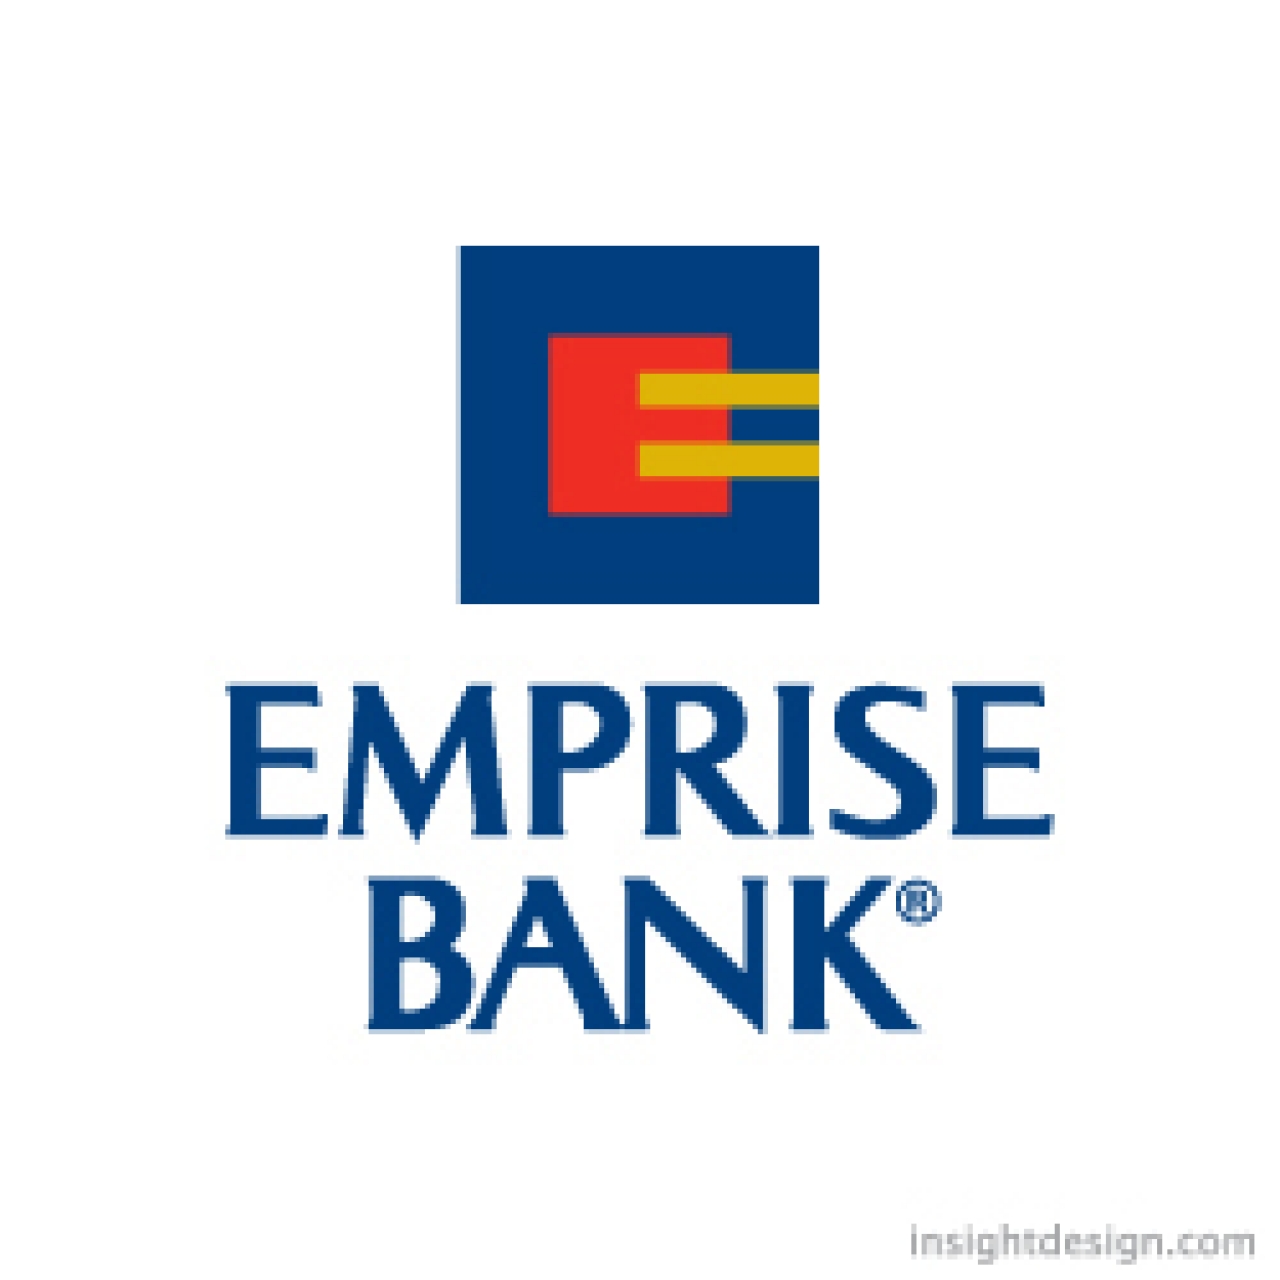 Emprise Bank is a statewide bank